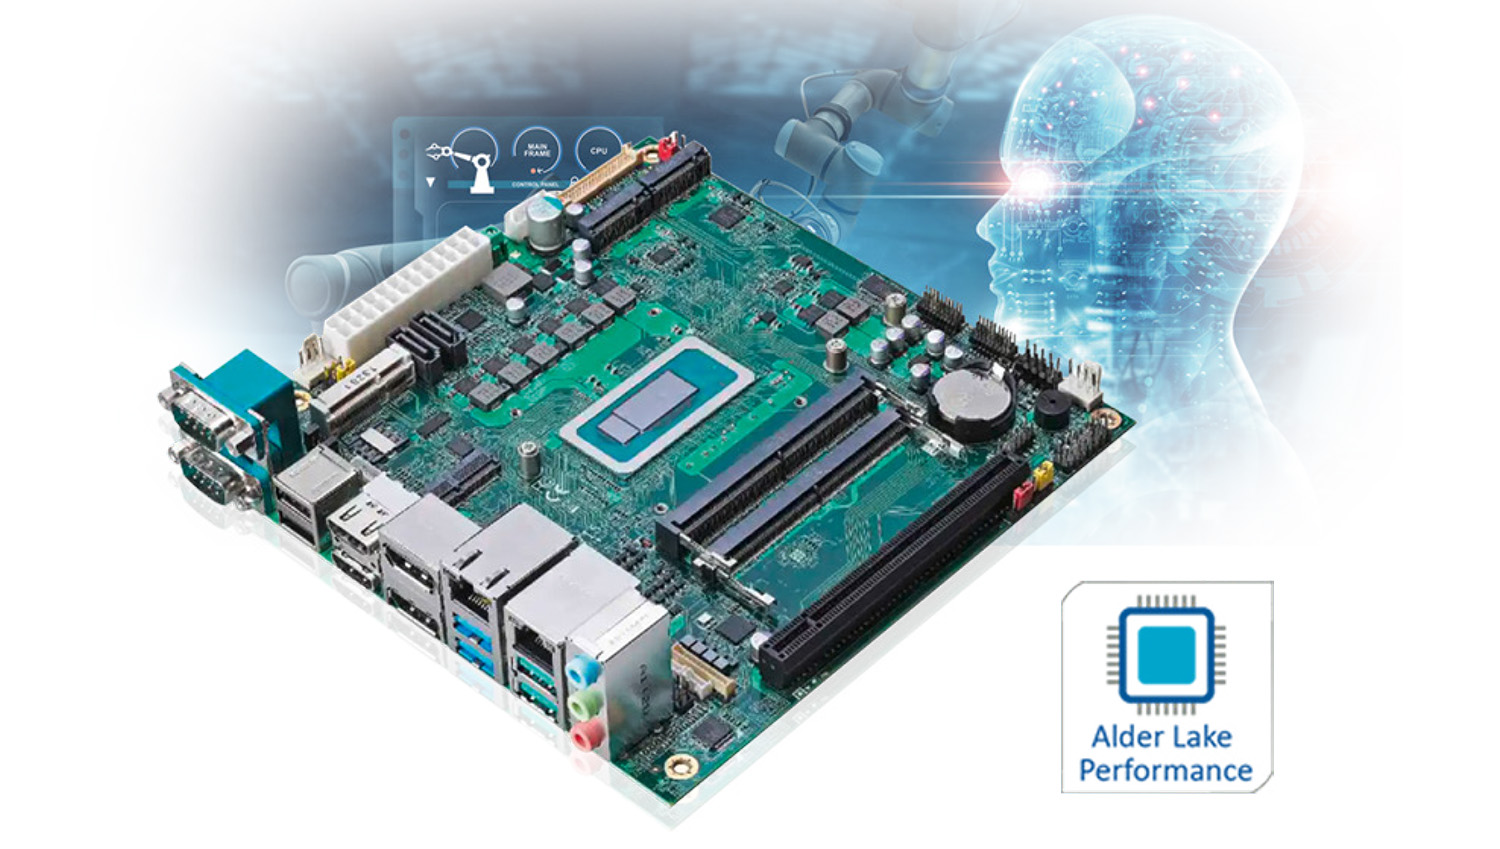 High performance for embedded systems: Mini-ITX Board with Alder Lake processor